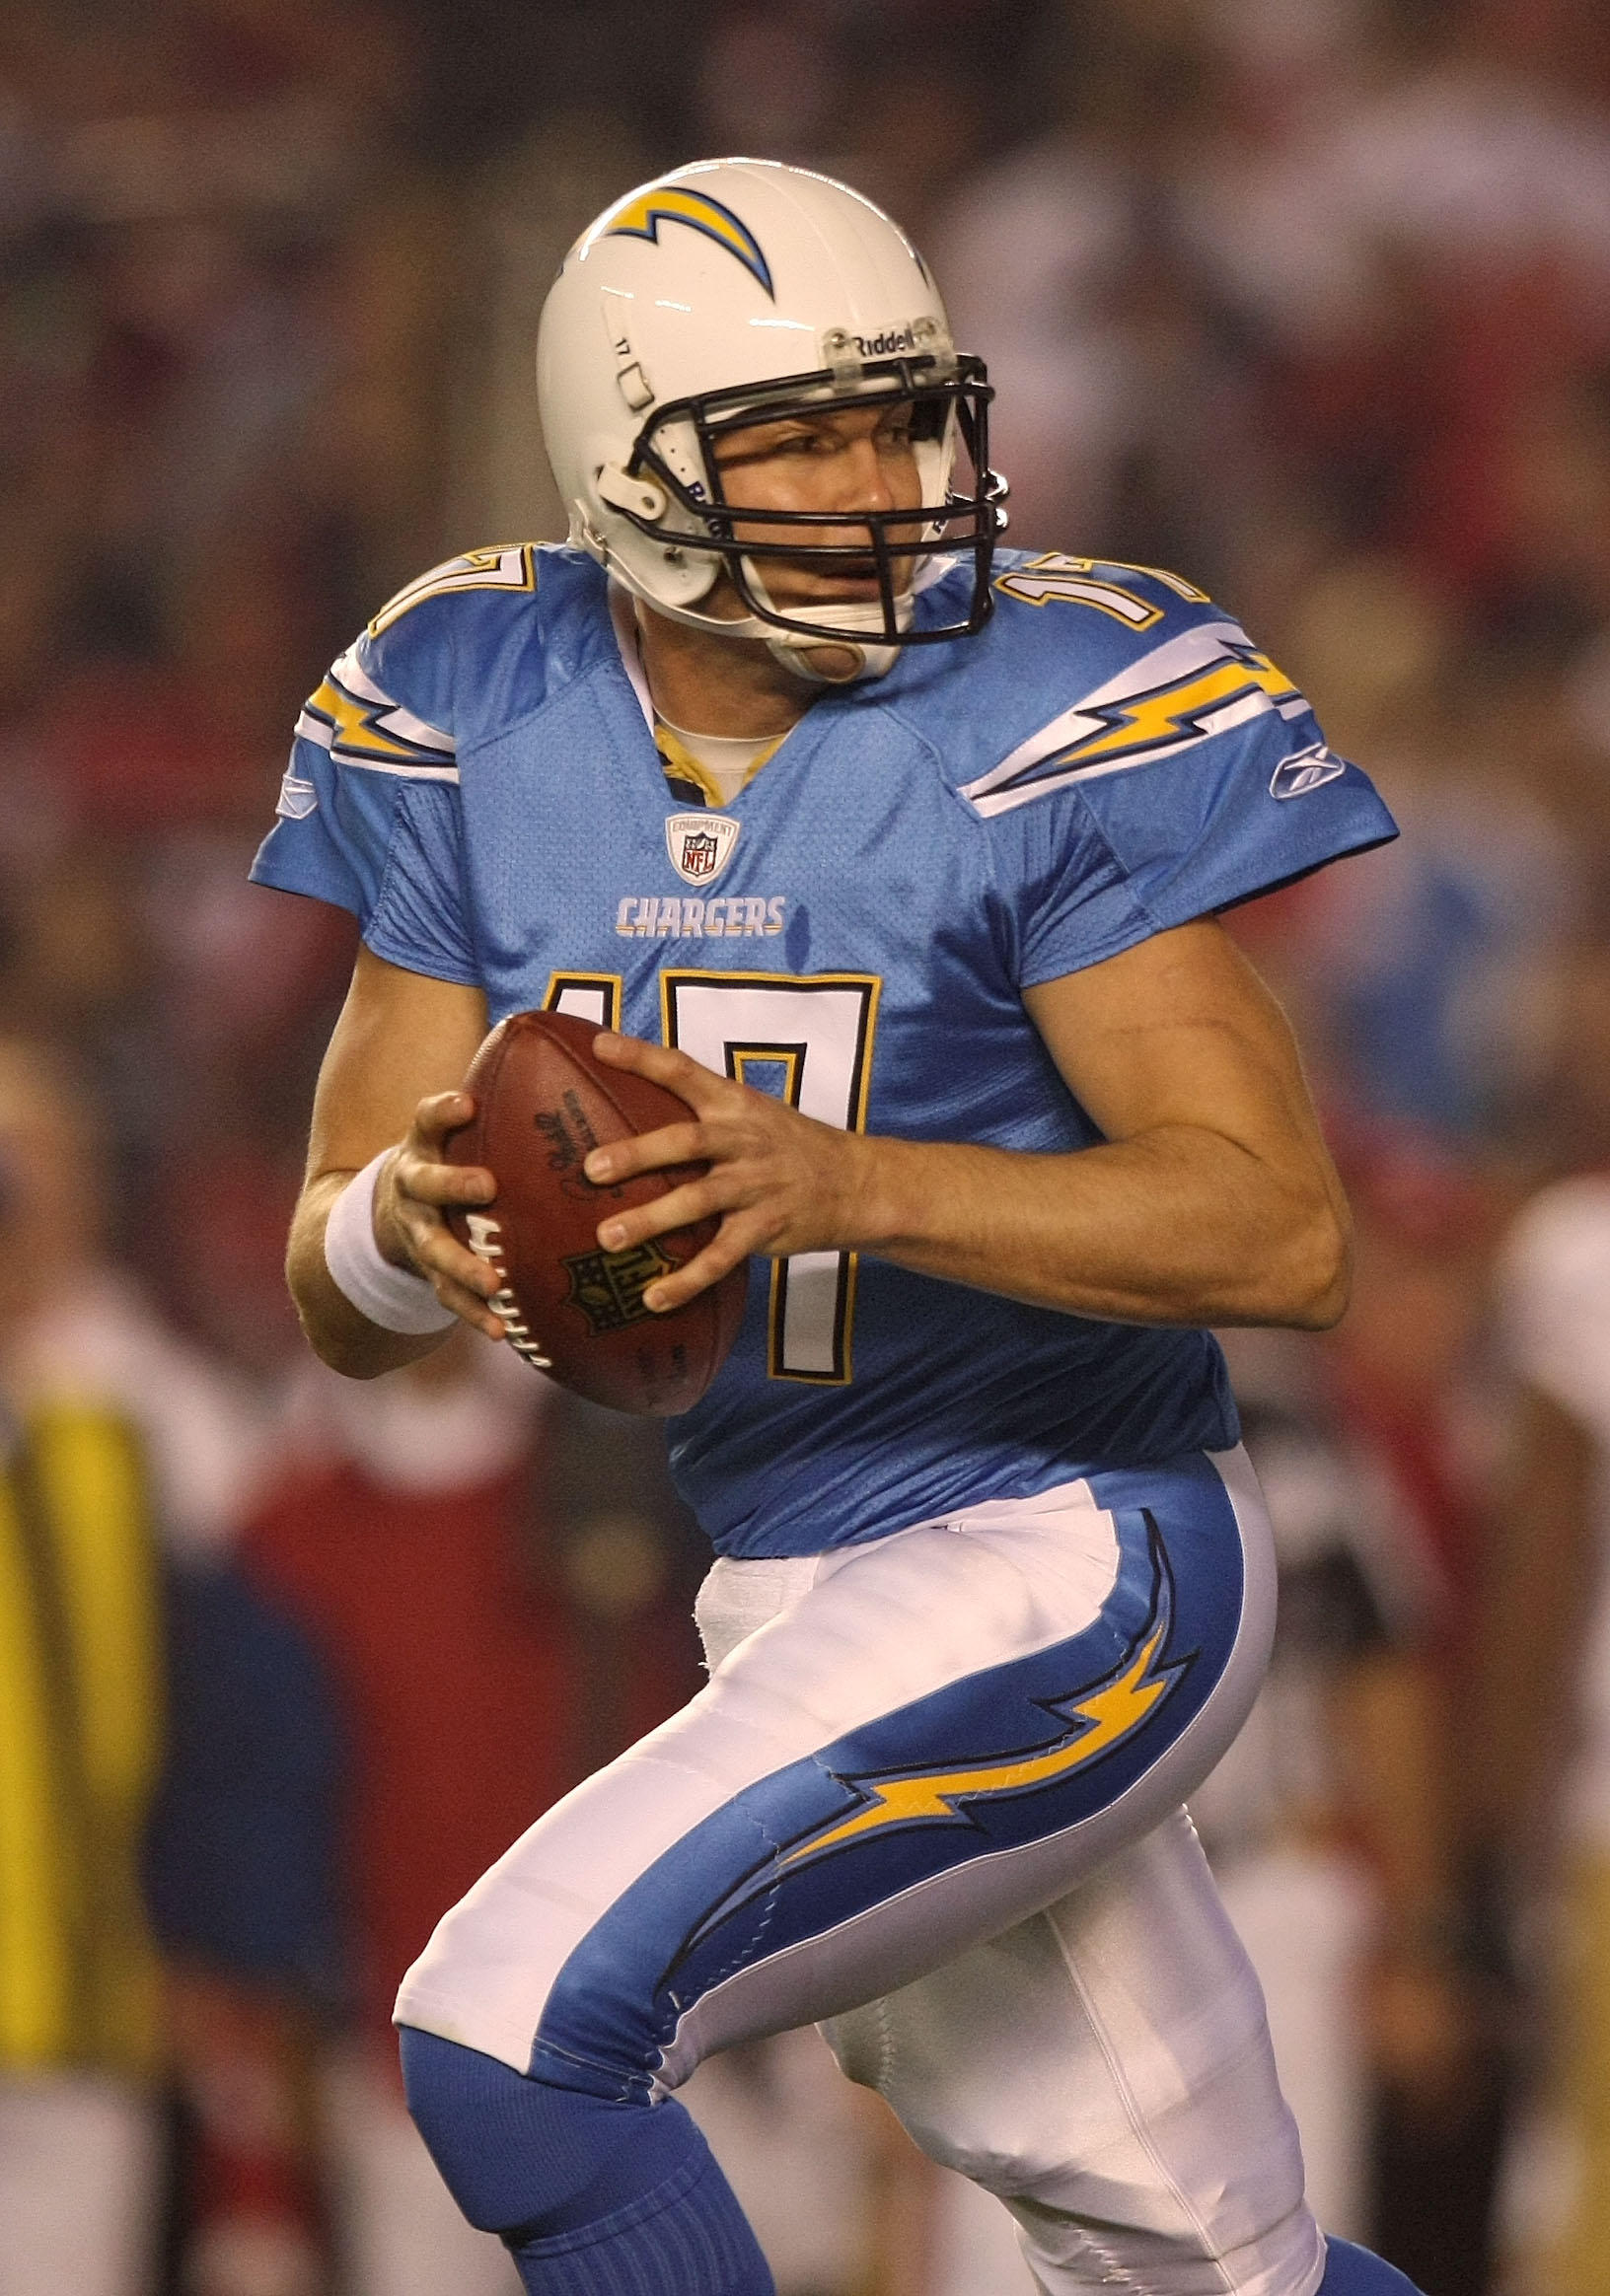 SAN DIEGO, CA - DECEMBER 16:  Quarterback Philip Rivers #17 of the San Diego Chargers drops back to pass against the San Francisco 49ers at Qualcomm Stadium on December 16, 2010 in San Diego, California.  (Photo by Donald Miralle/Getty Images)